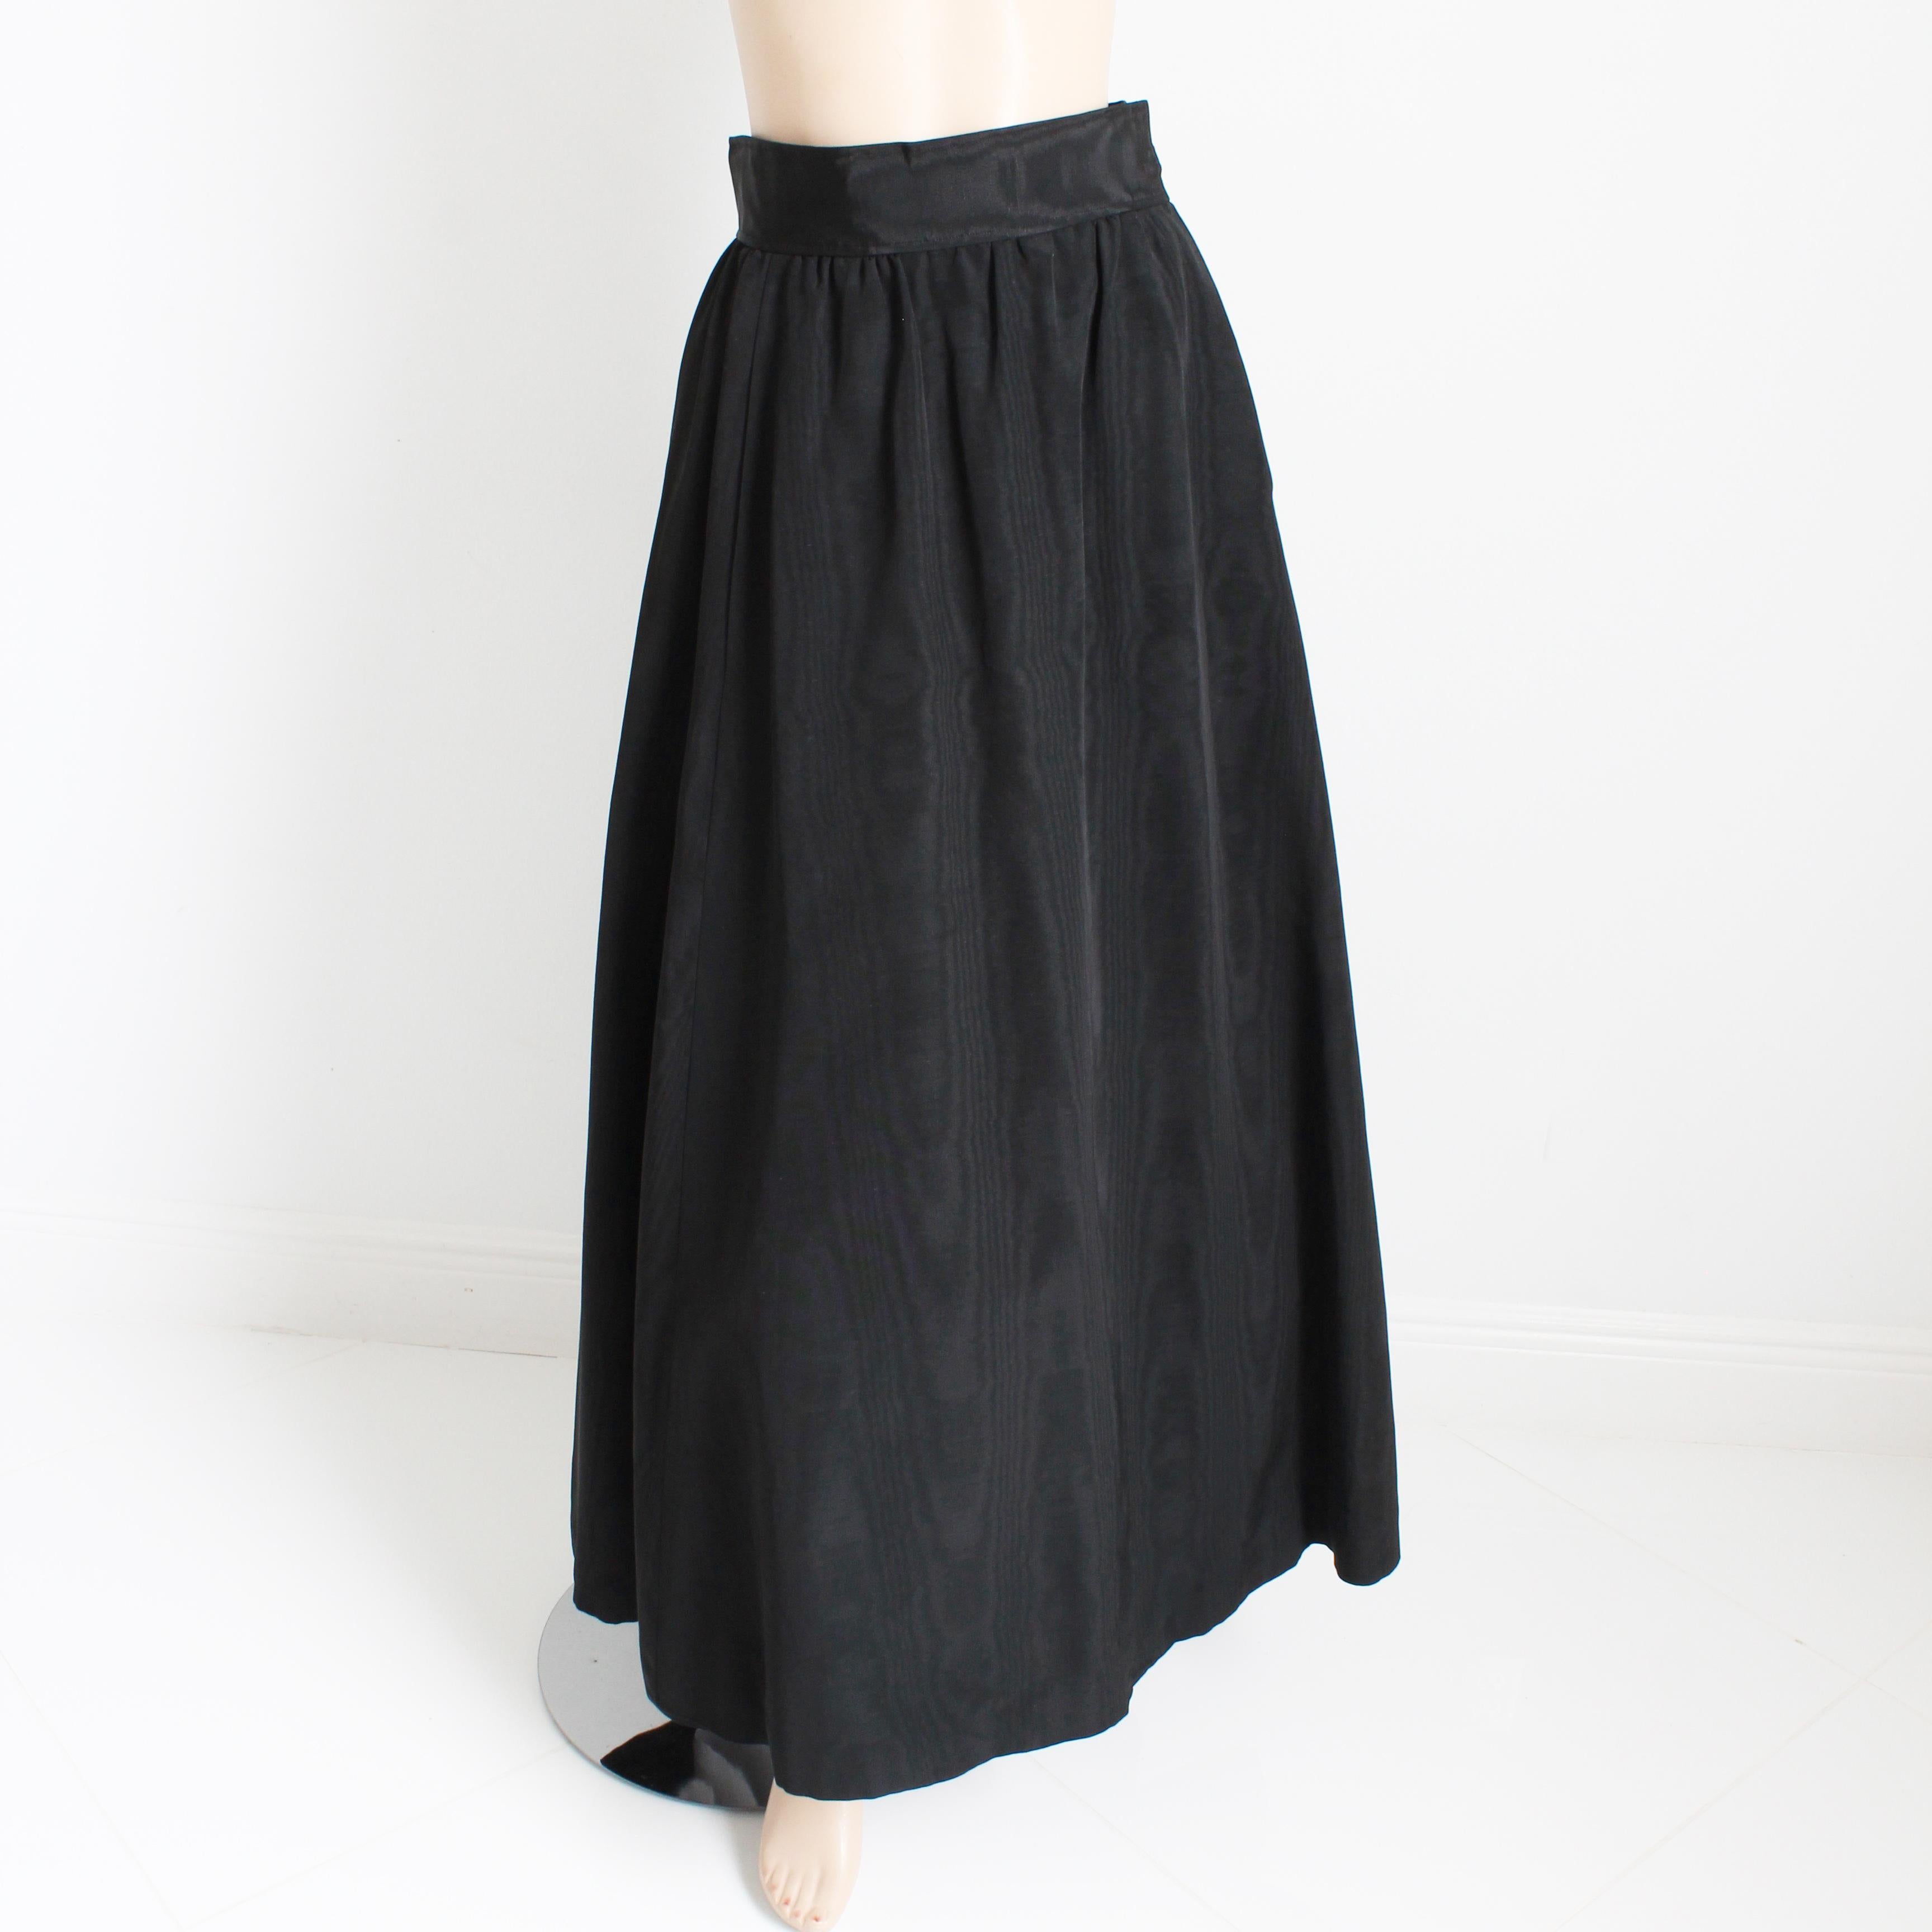 Authentic, preowned, vintage Yves Saint Laurent Rive Gauche black moire maxi skirt, likely made for the Ballet Russes or Russian collection in the late 70s. Made from a moire taffeta fabric (no content label), it fastens with hook/eye closures and a